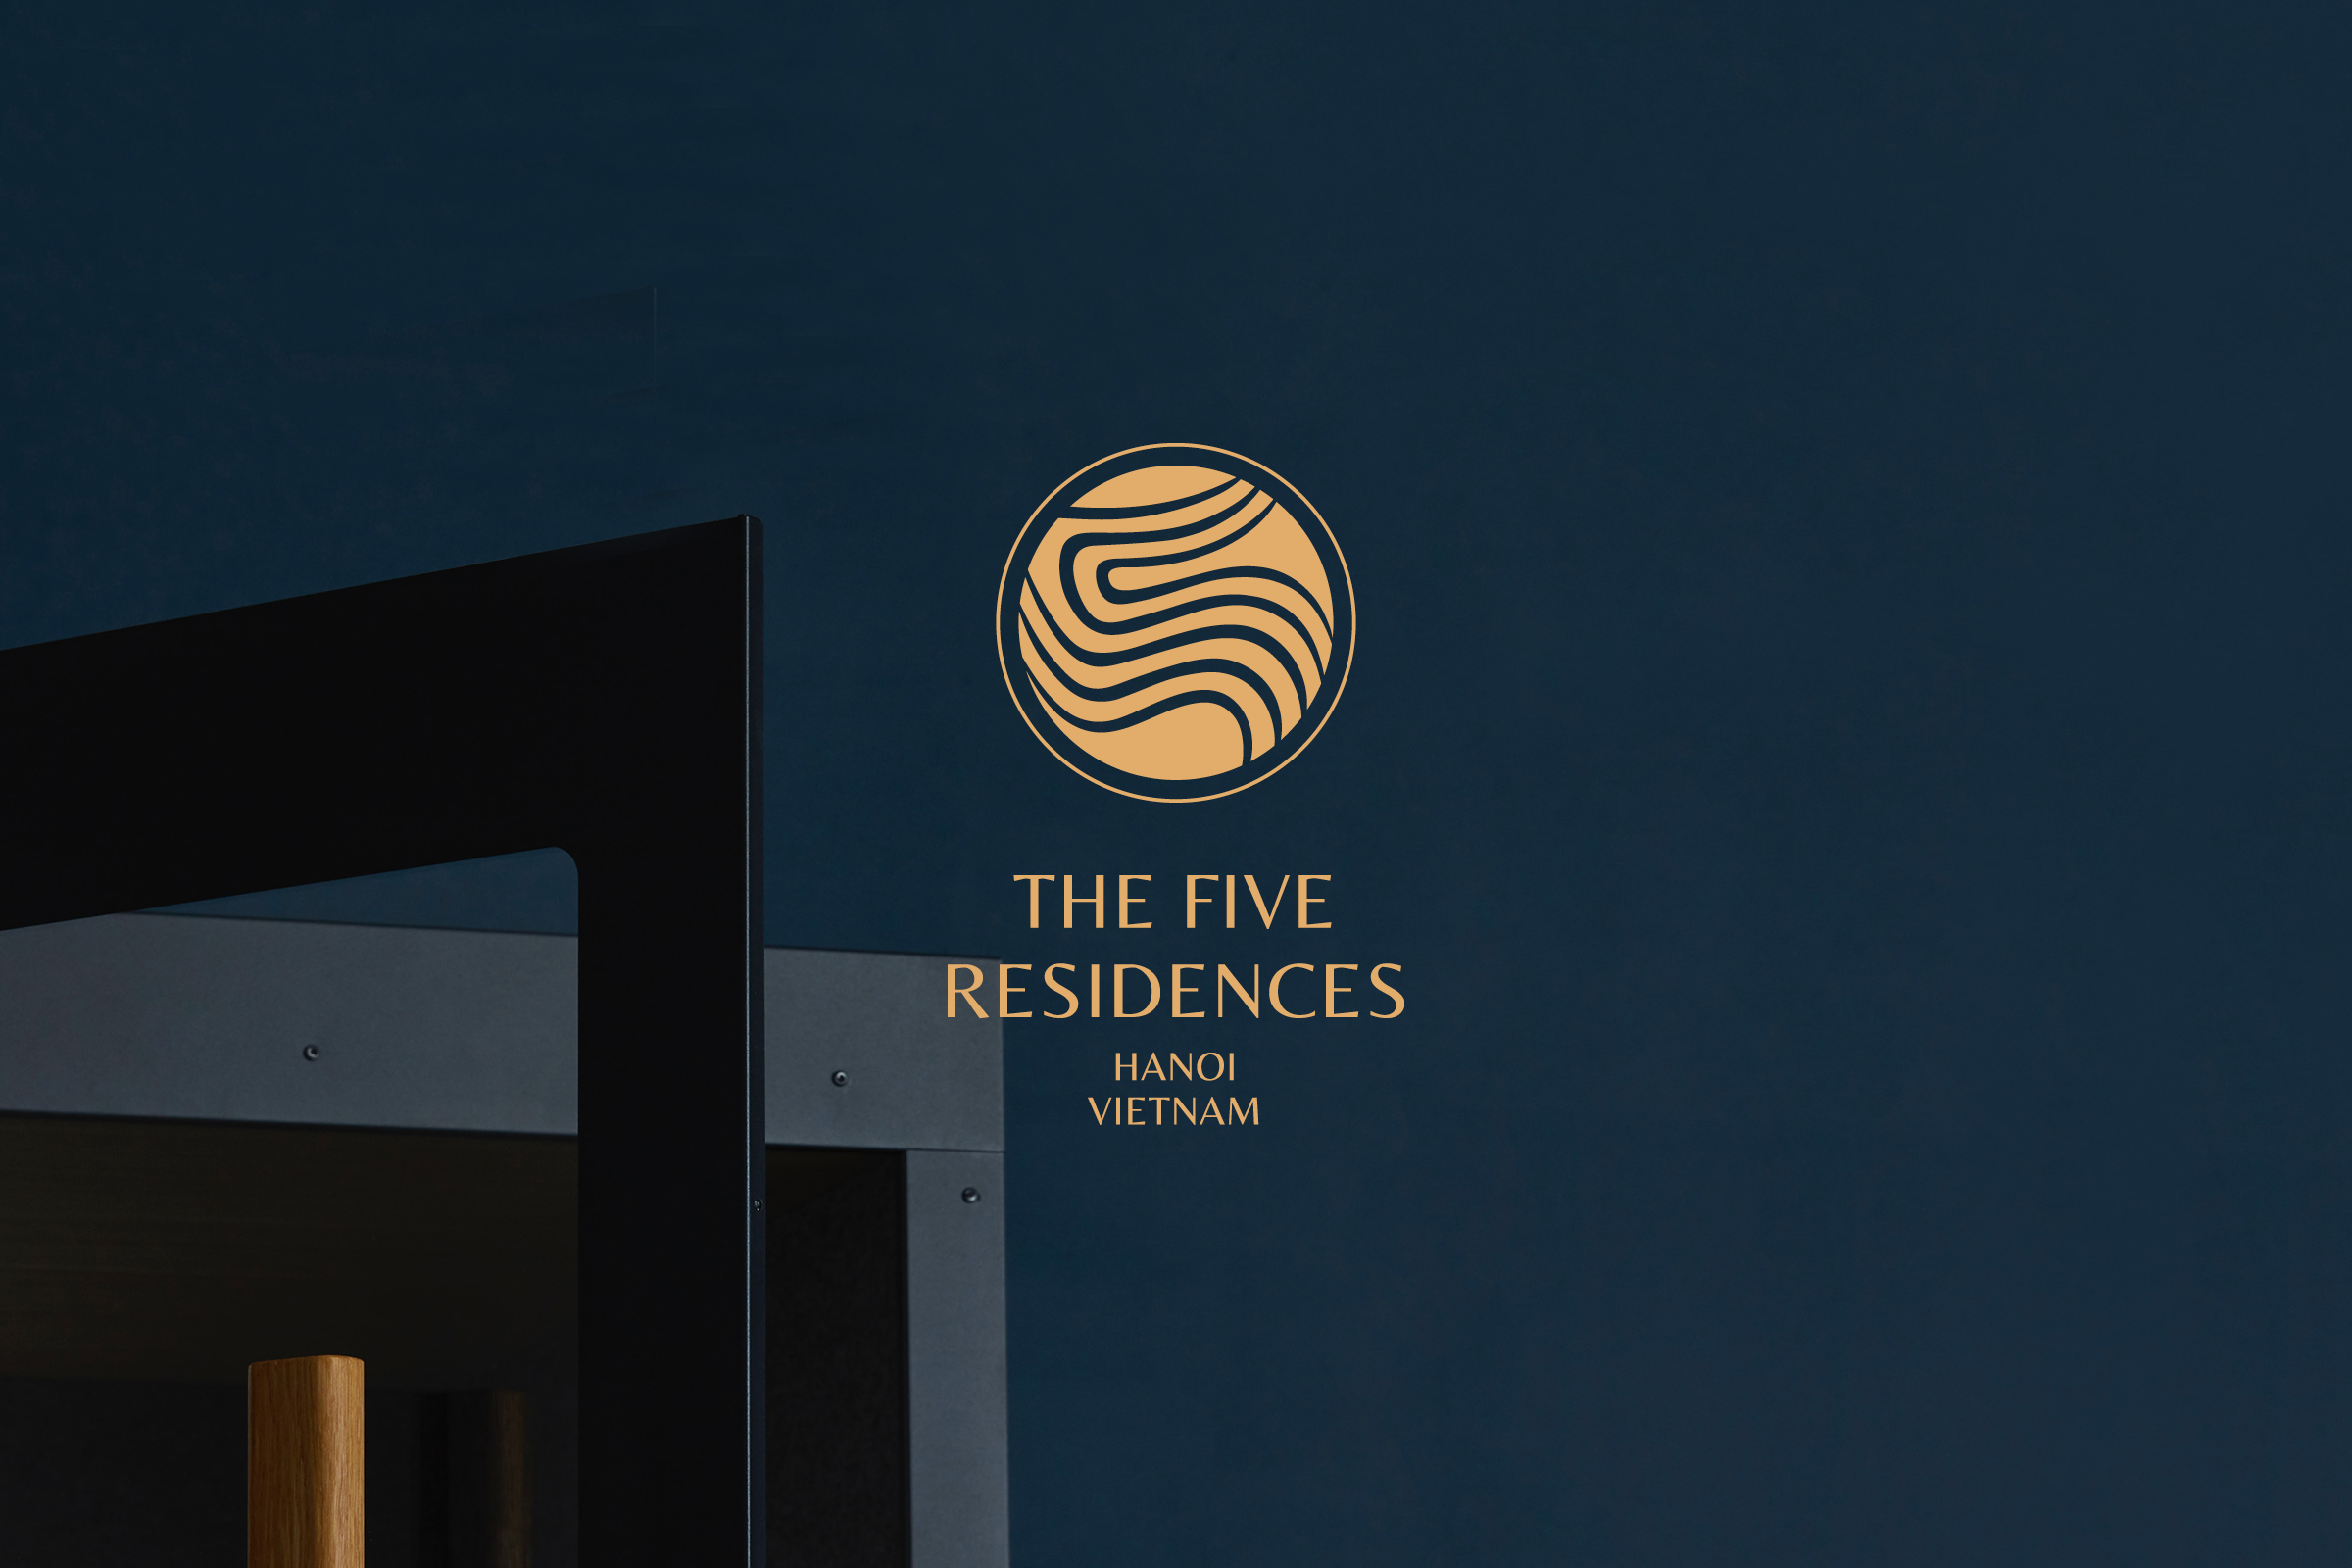 The Five Residences